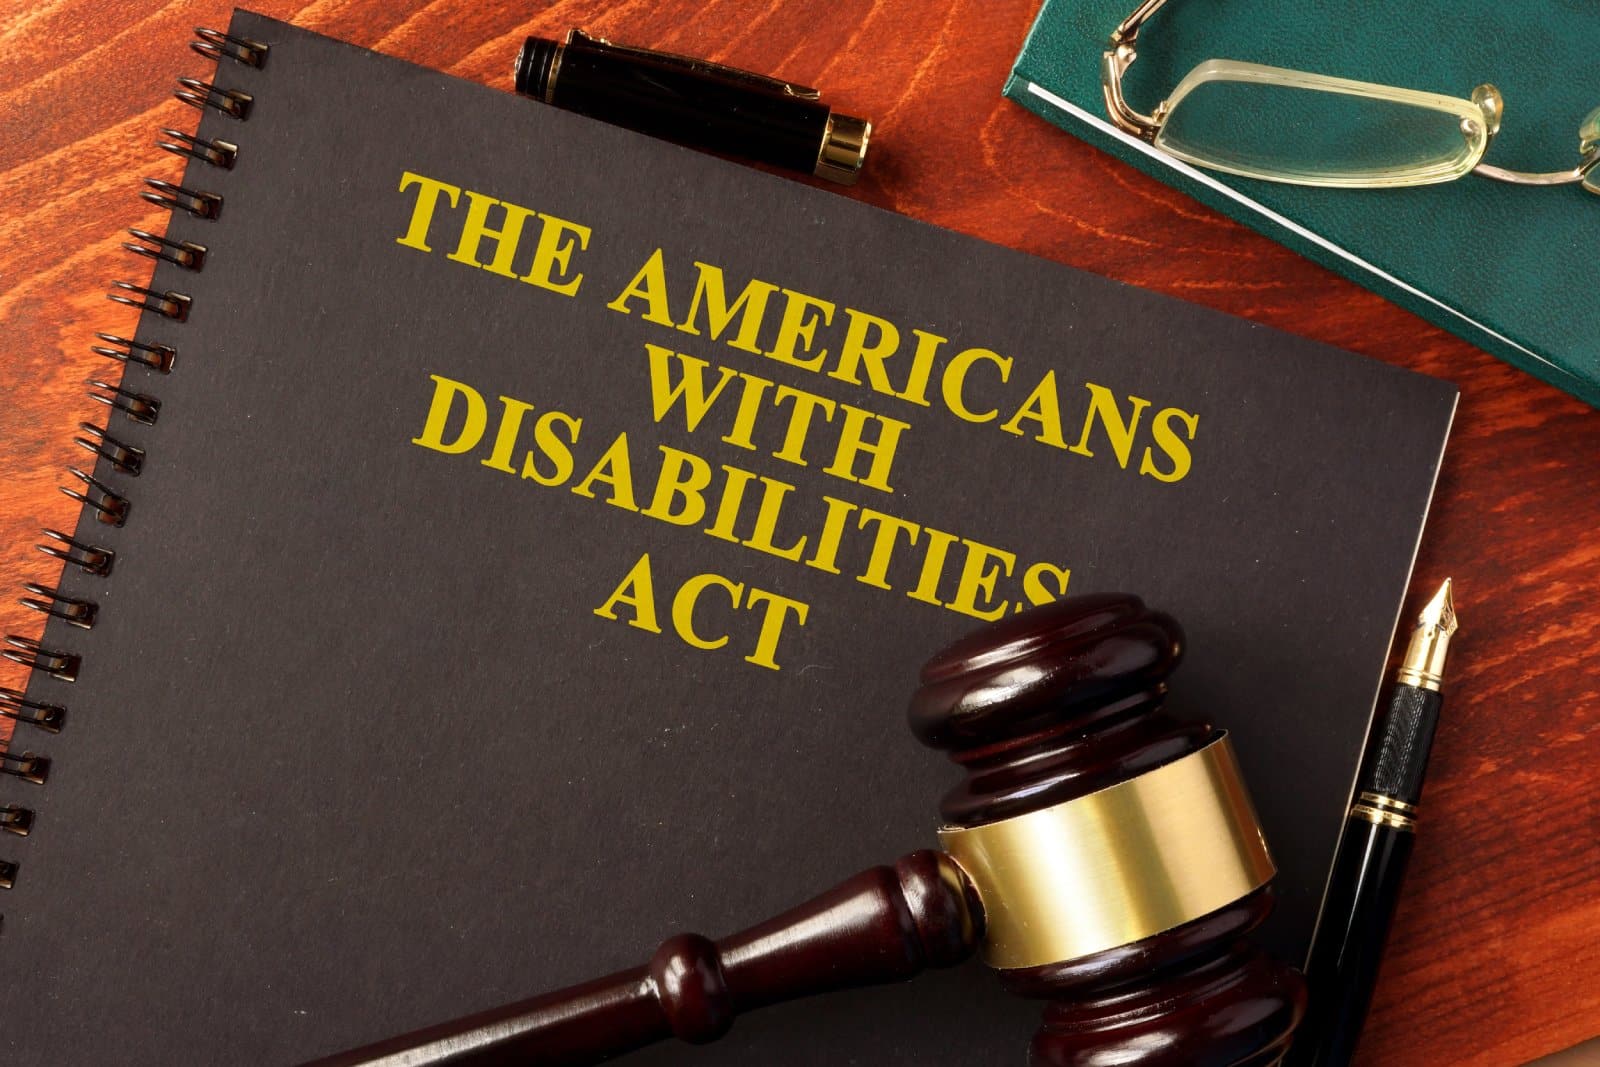 Image Credit: Shutterstock / Vitalii Vodolazskyi <p><span>Judith Heumann and other women with disabilities were at the forefront of the disability rights movement. Their advocacy led to significant legislation like the Americans with Disabilities Act (ADA).</span></p>